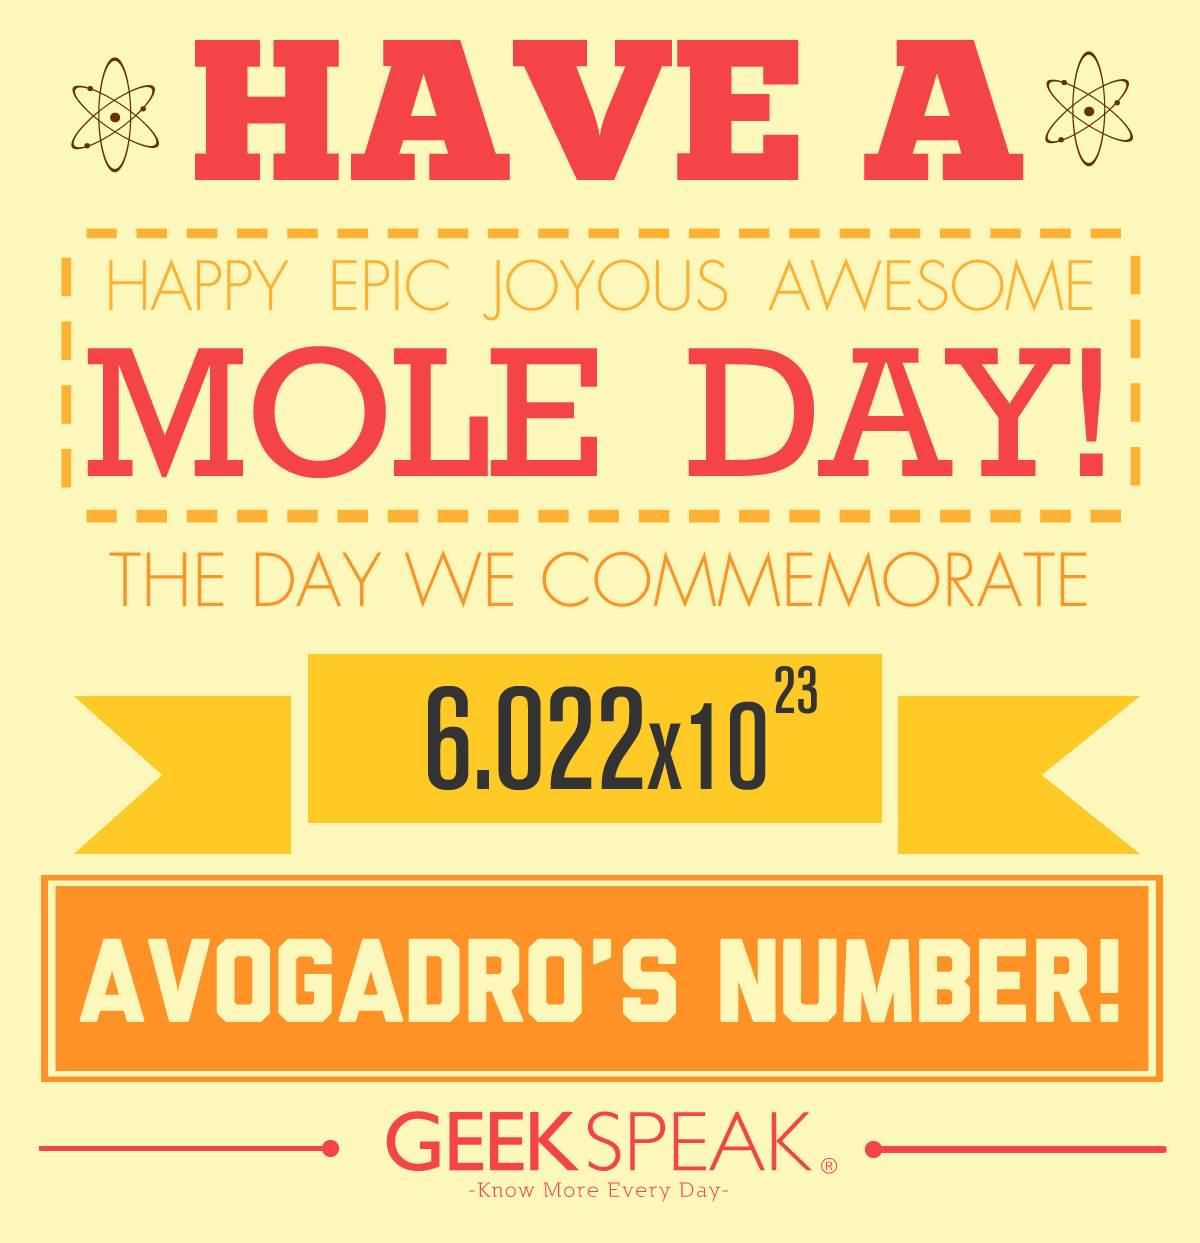 Have A Happy Epic Joyous Awesome Mole Day The Day We Commemorate